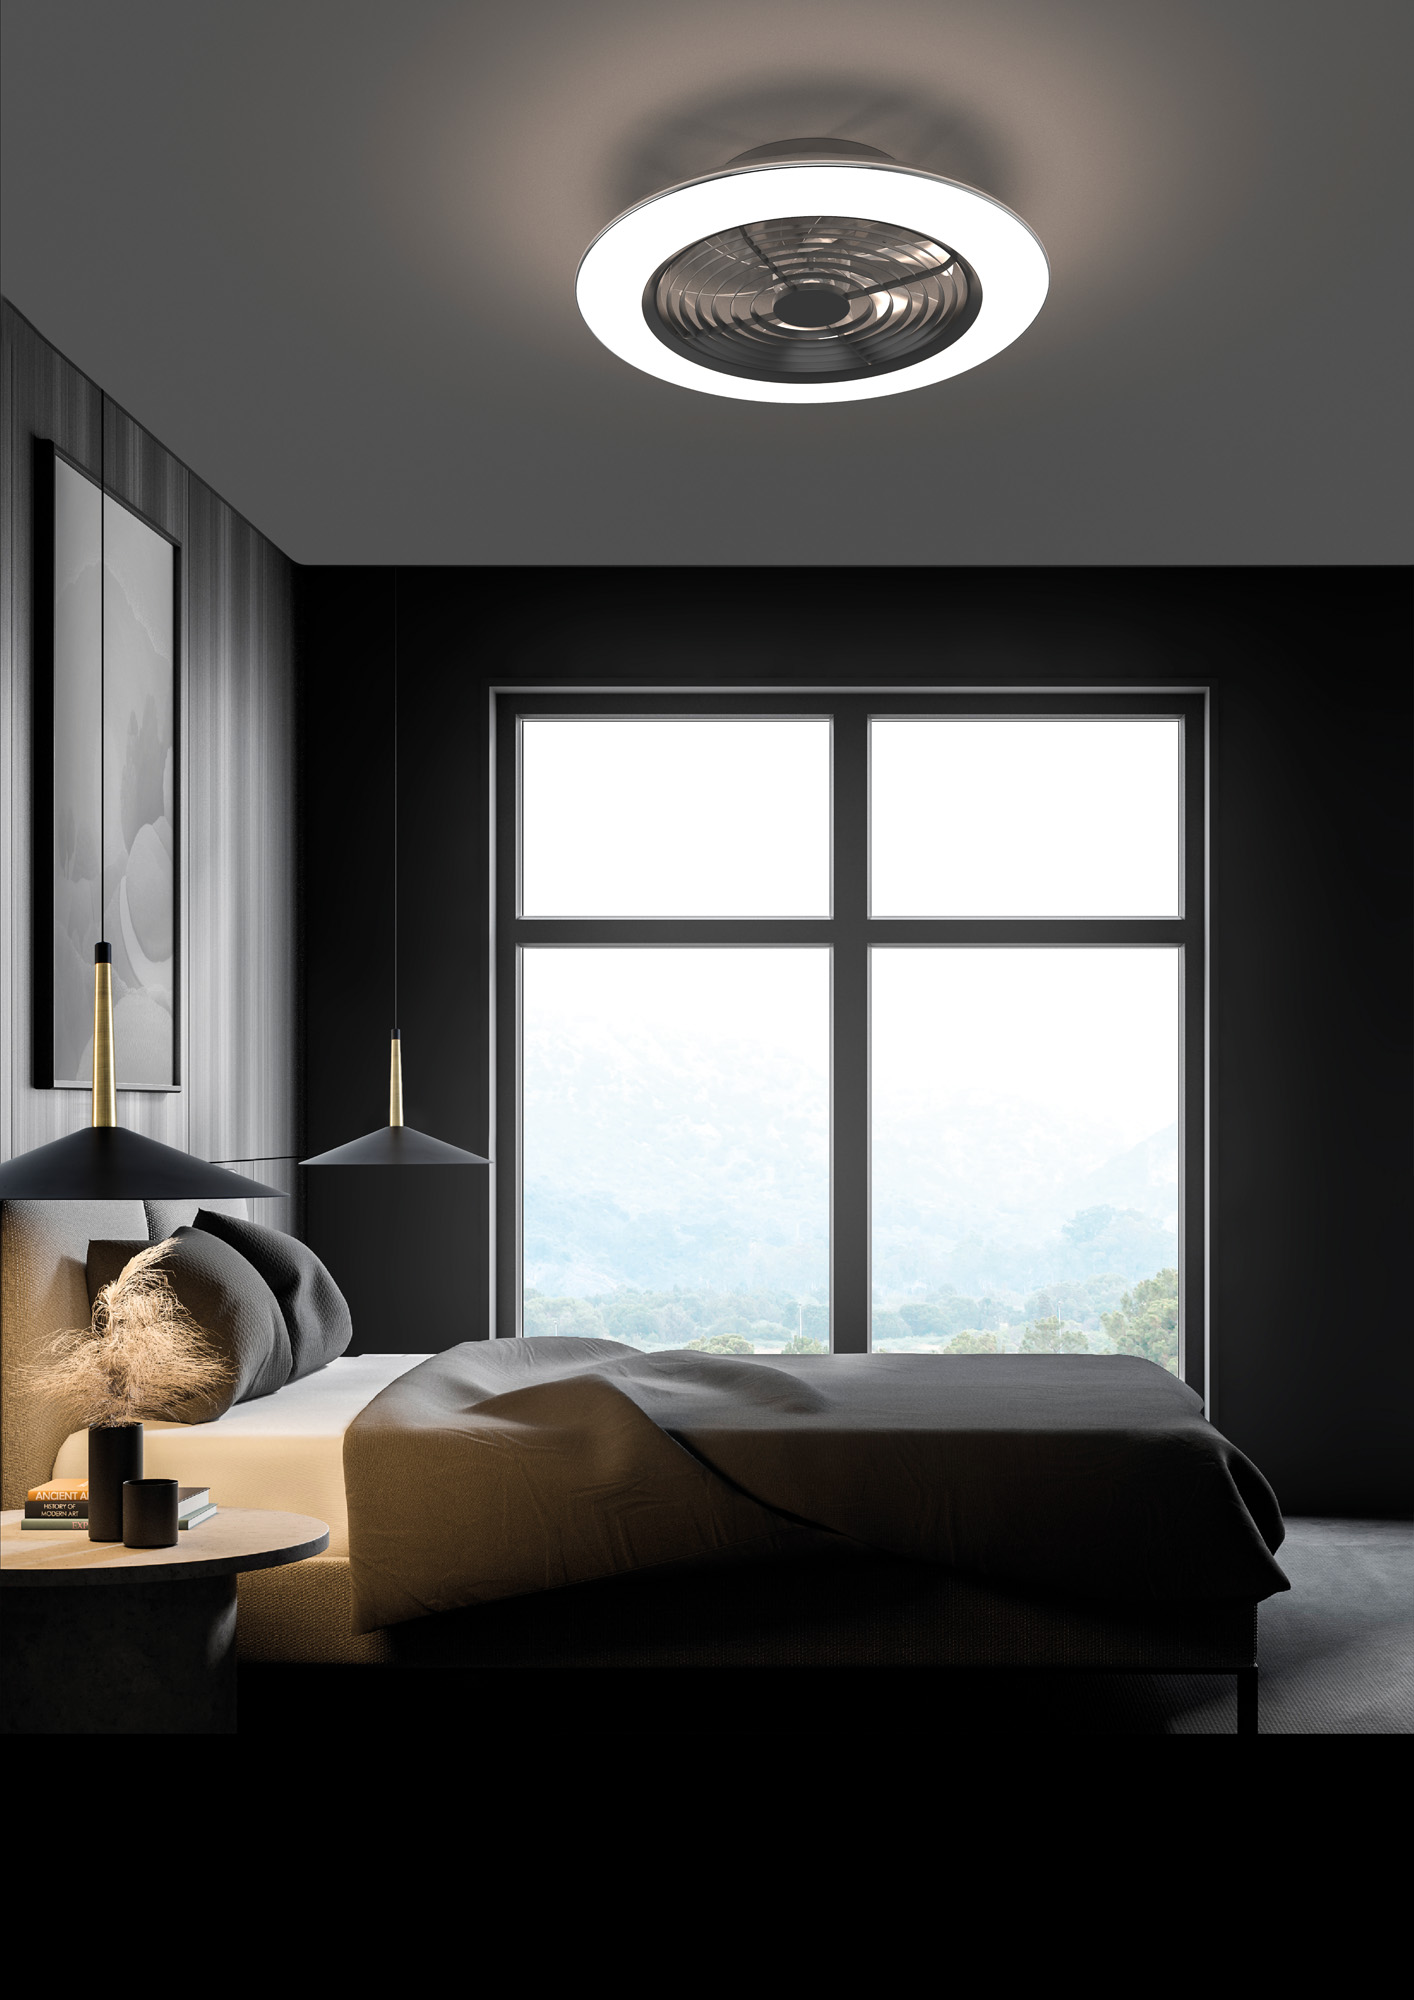 Alisio XL Heating, Cooling & Ventilation Mantra Ceiling Fans